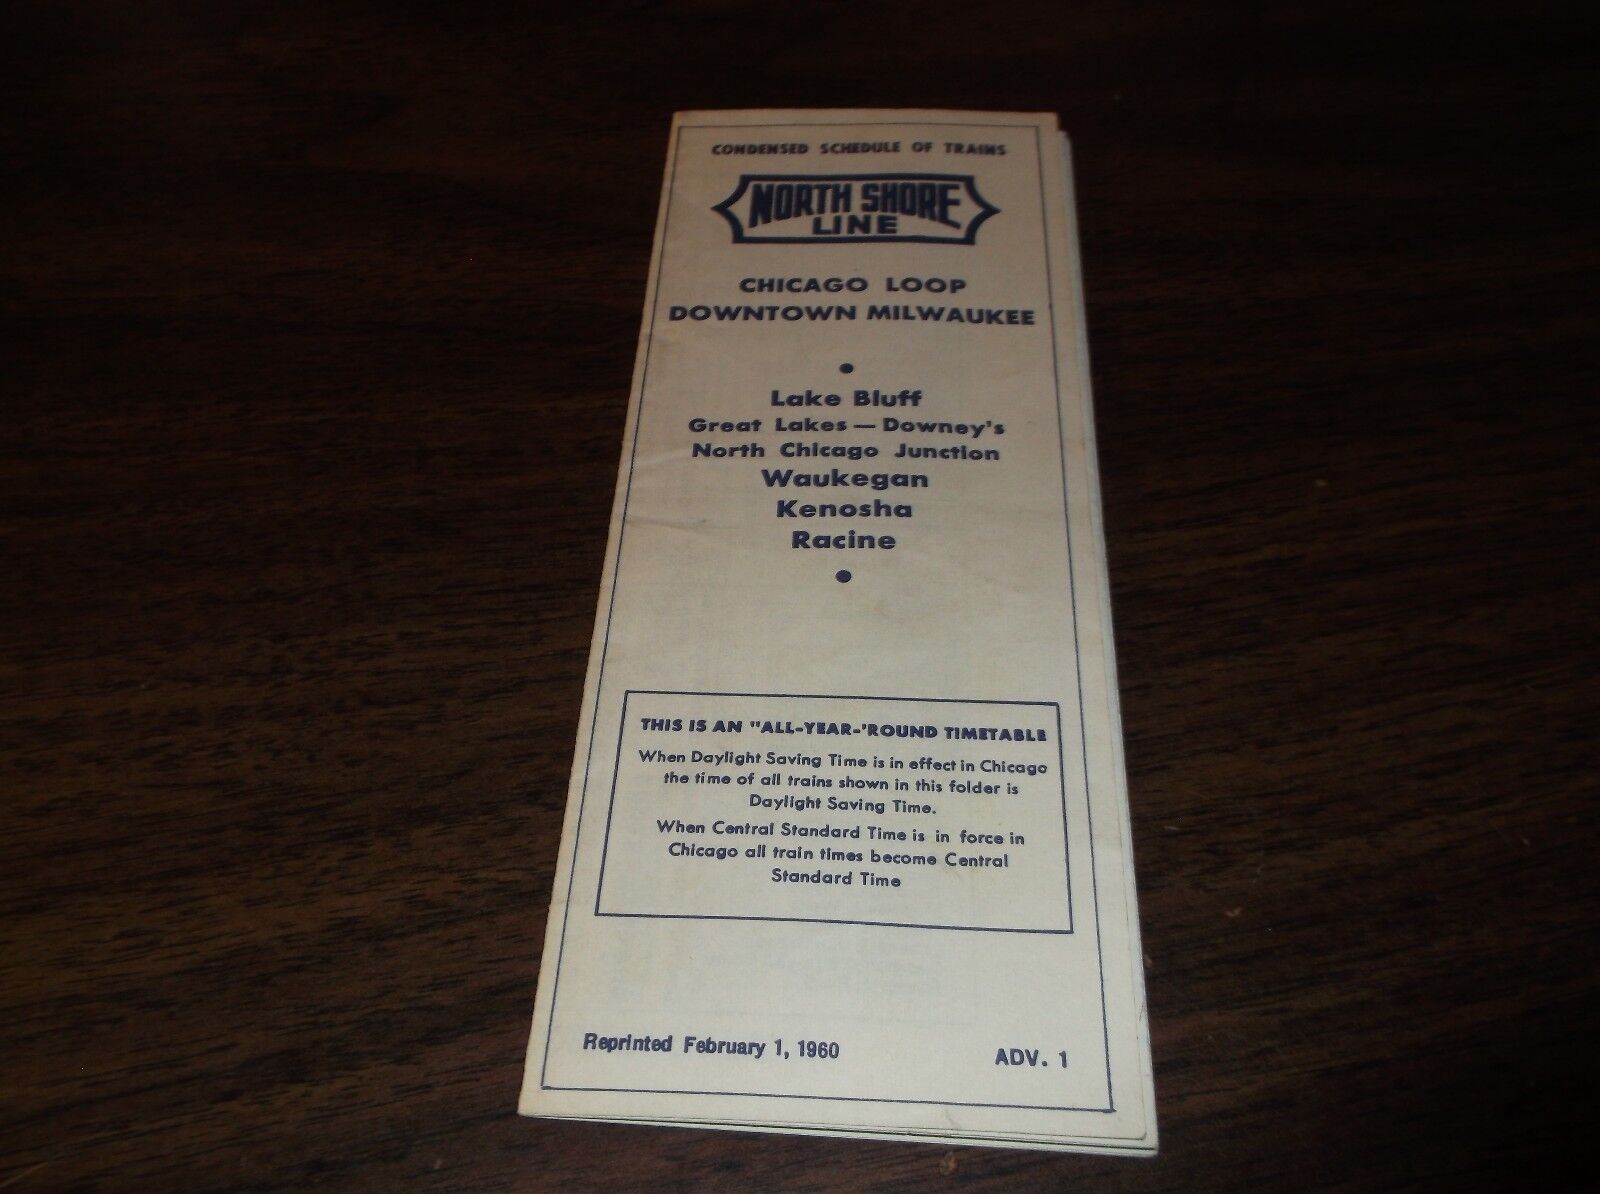 FEBRUARY 1960 CNS&M NORTH SHORE LINE CHICAGO LOOP-DOWNTOWN MILWAUKEE TIMETABLE